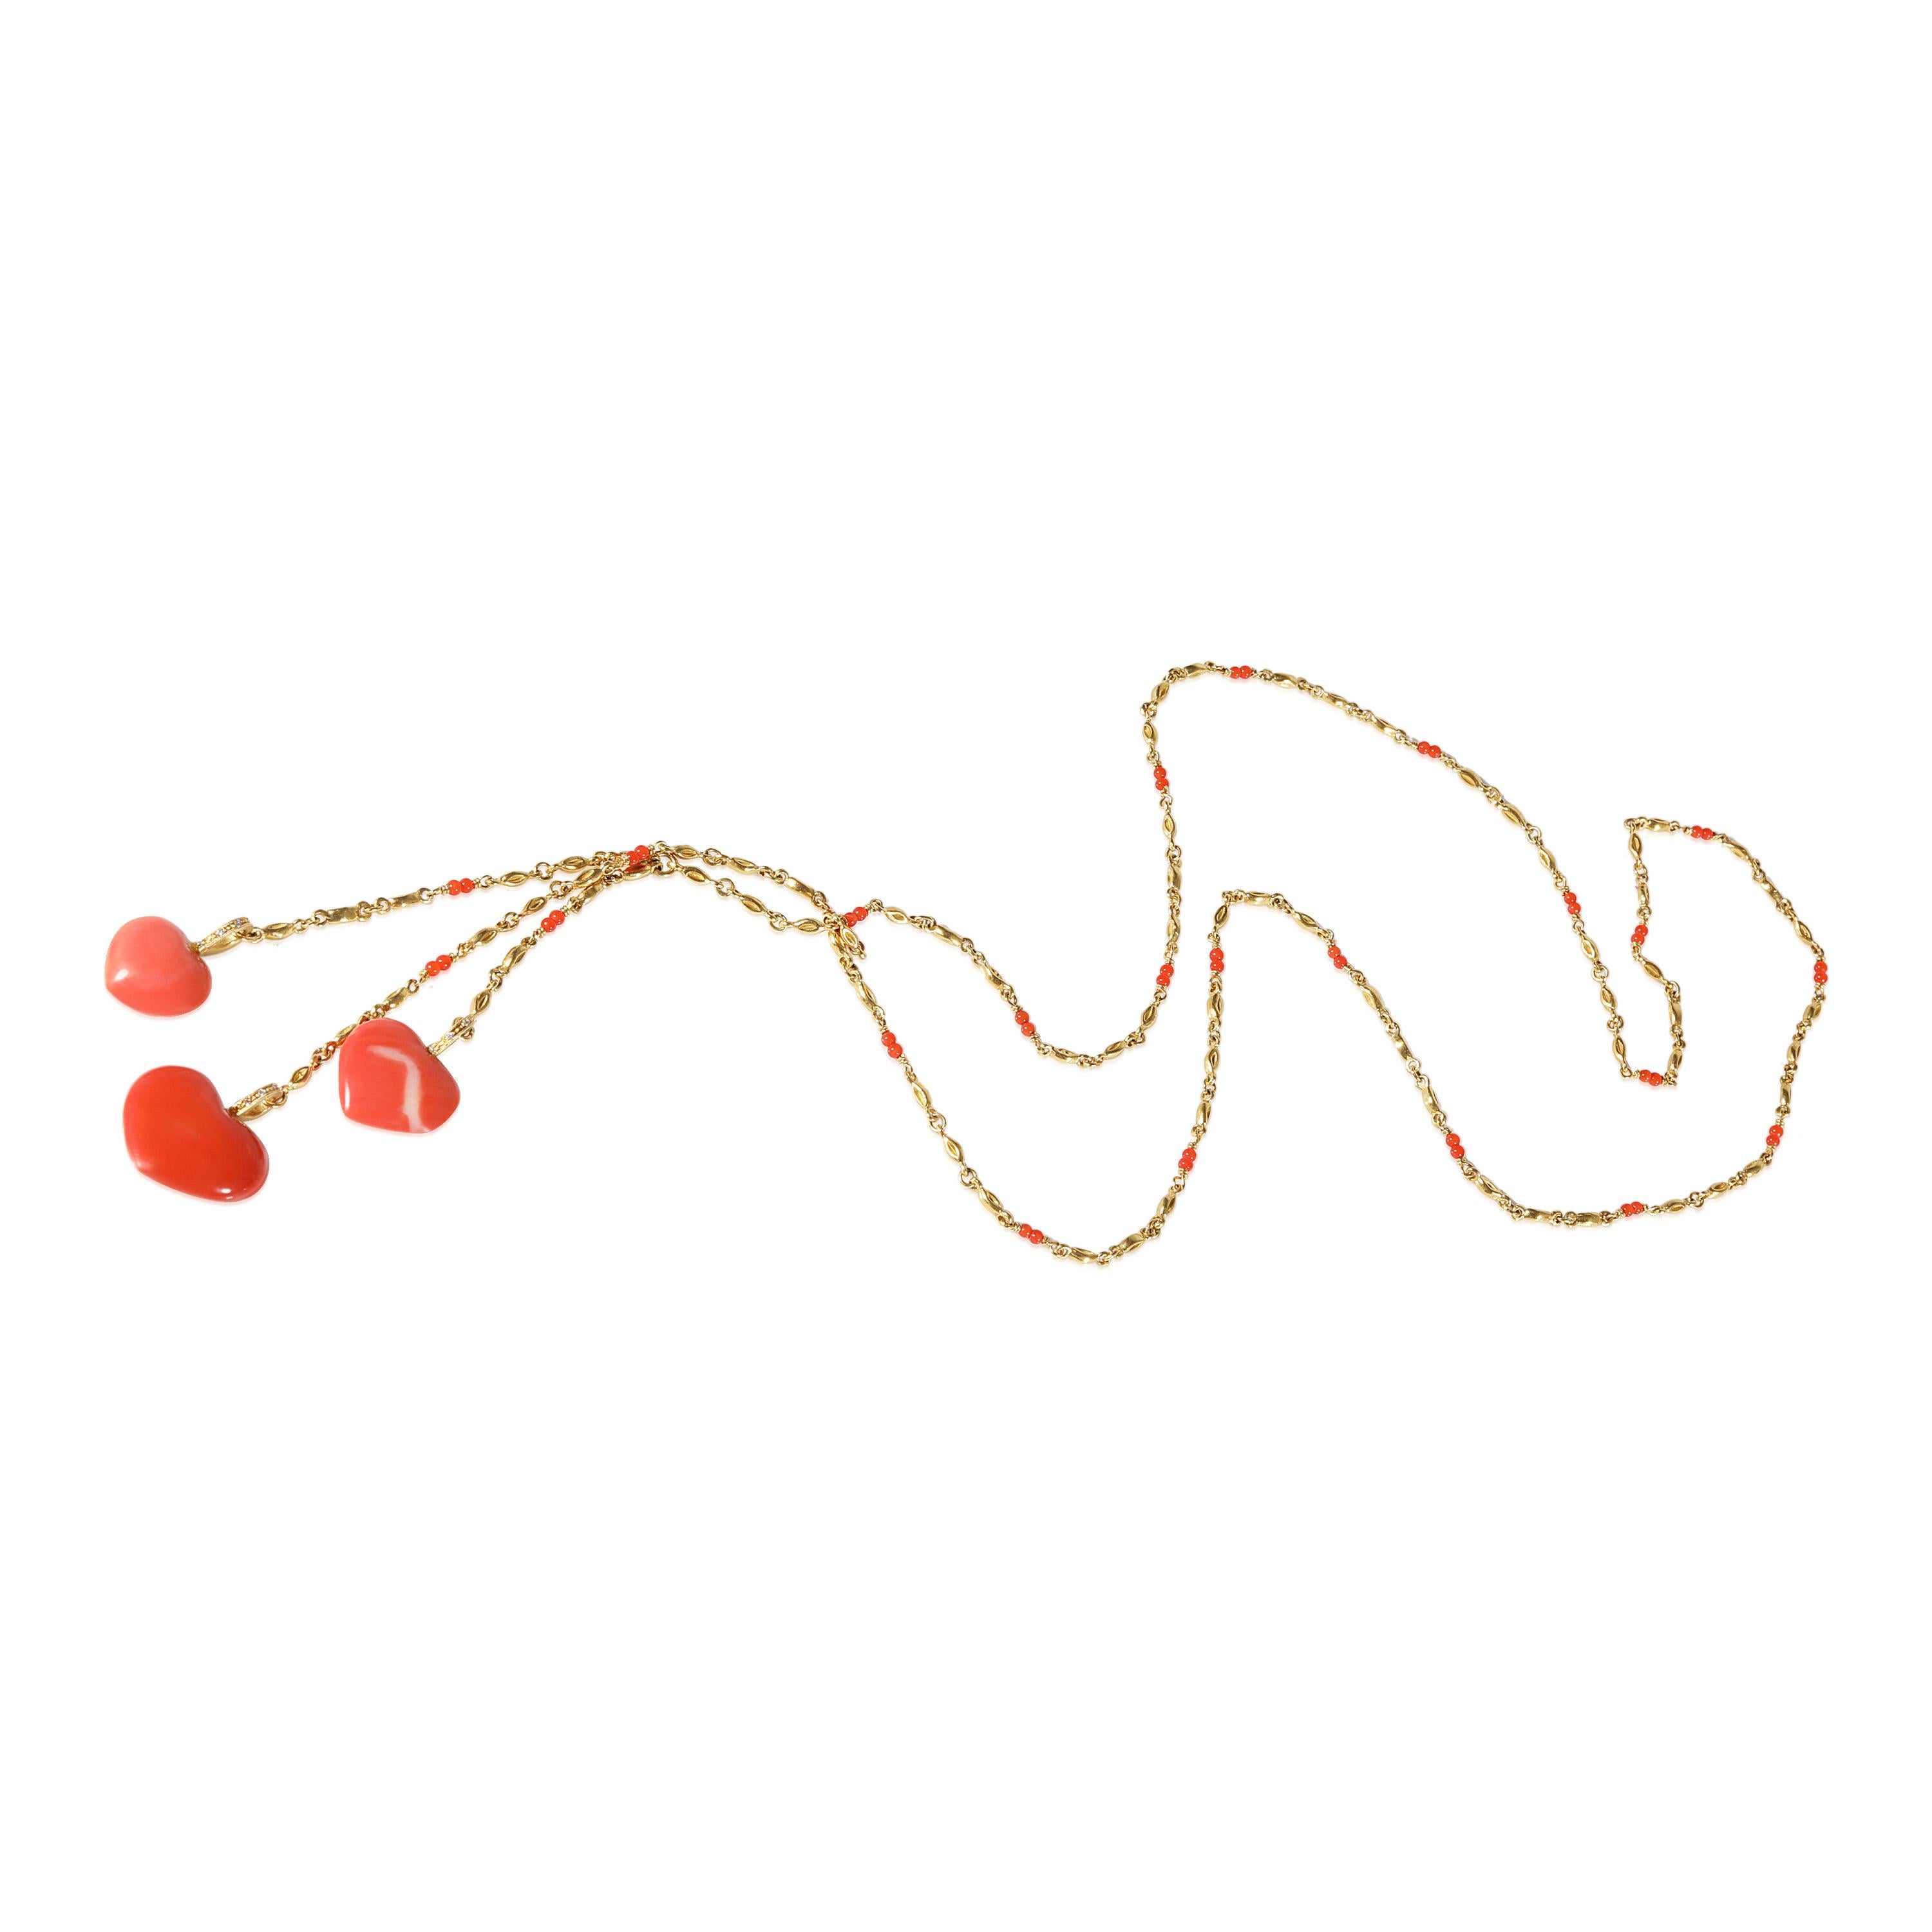 Coral Lariat Necklace with Hearts Necklace in 20k Yellow Gold In Excellent Condition For Sale In New York, NY